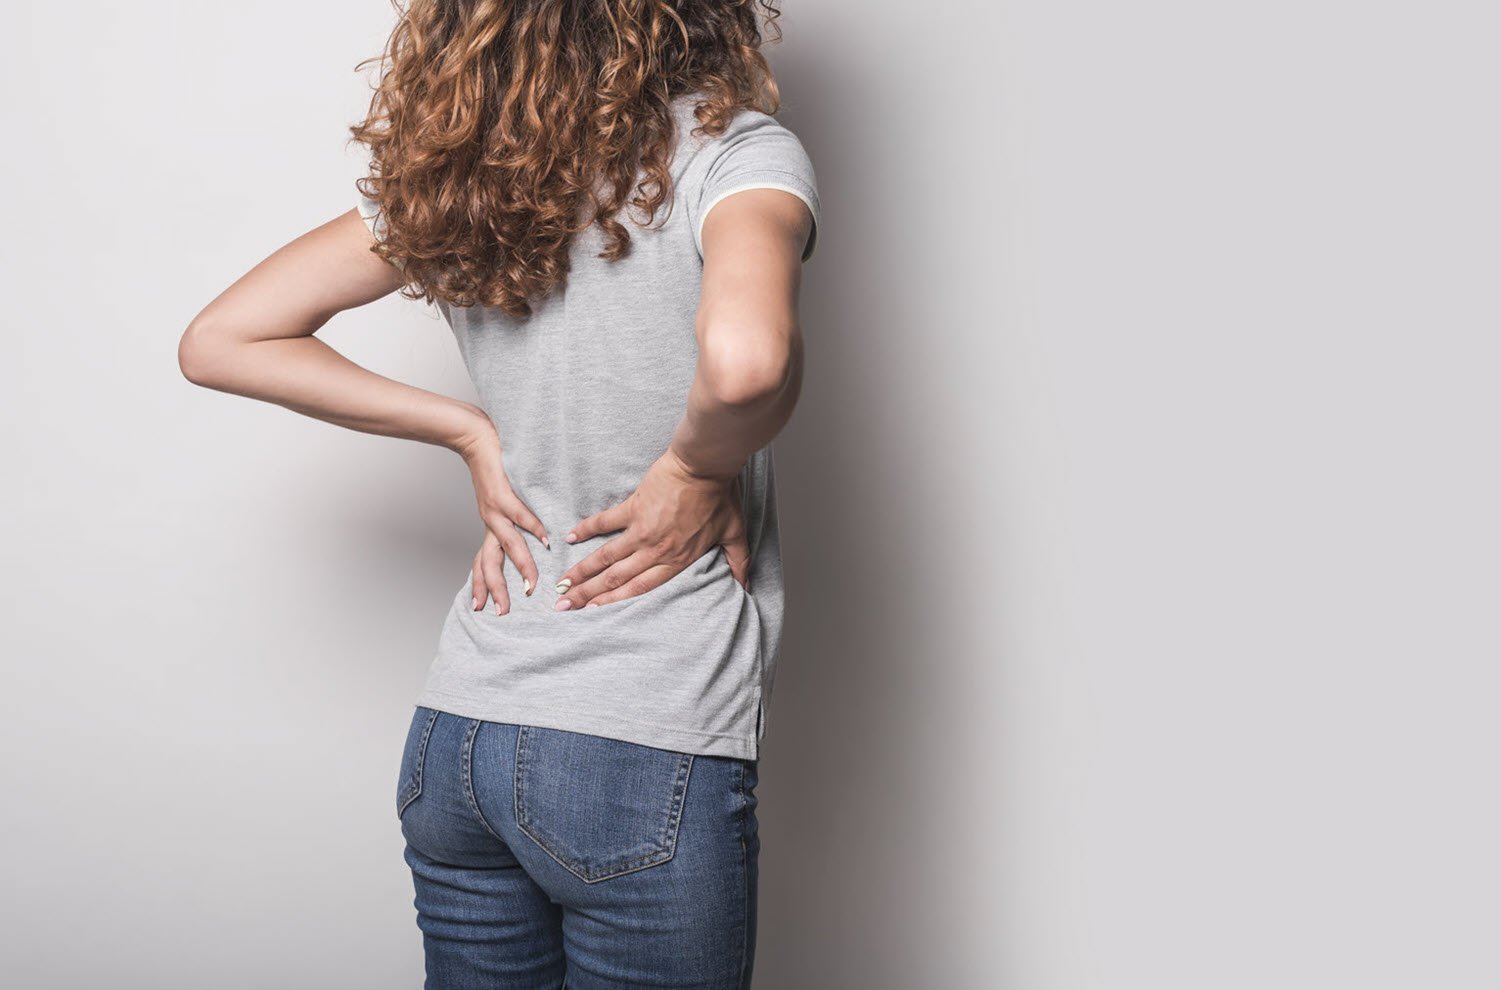 The Best Way To Prevent Morning Lower Back Pain | Cushion Lab